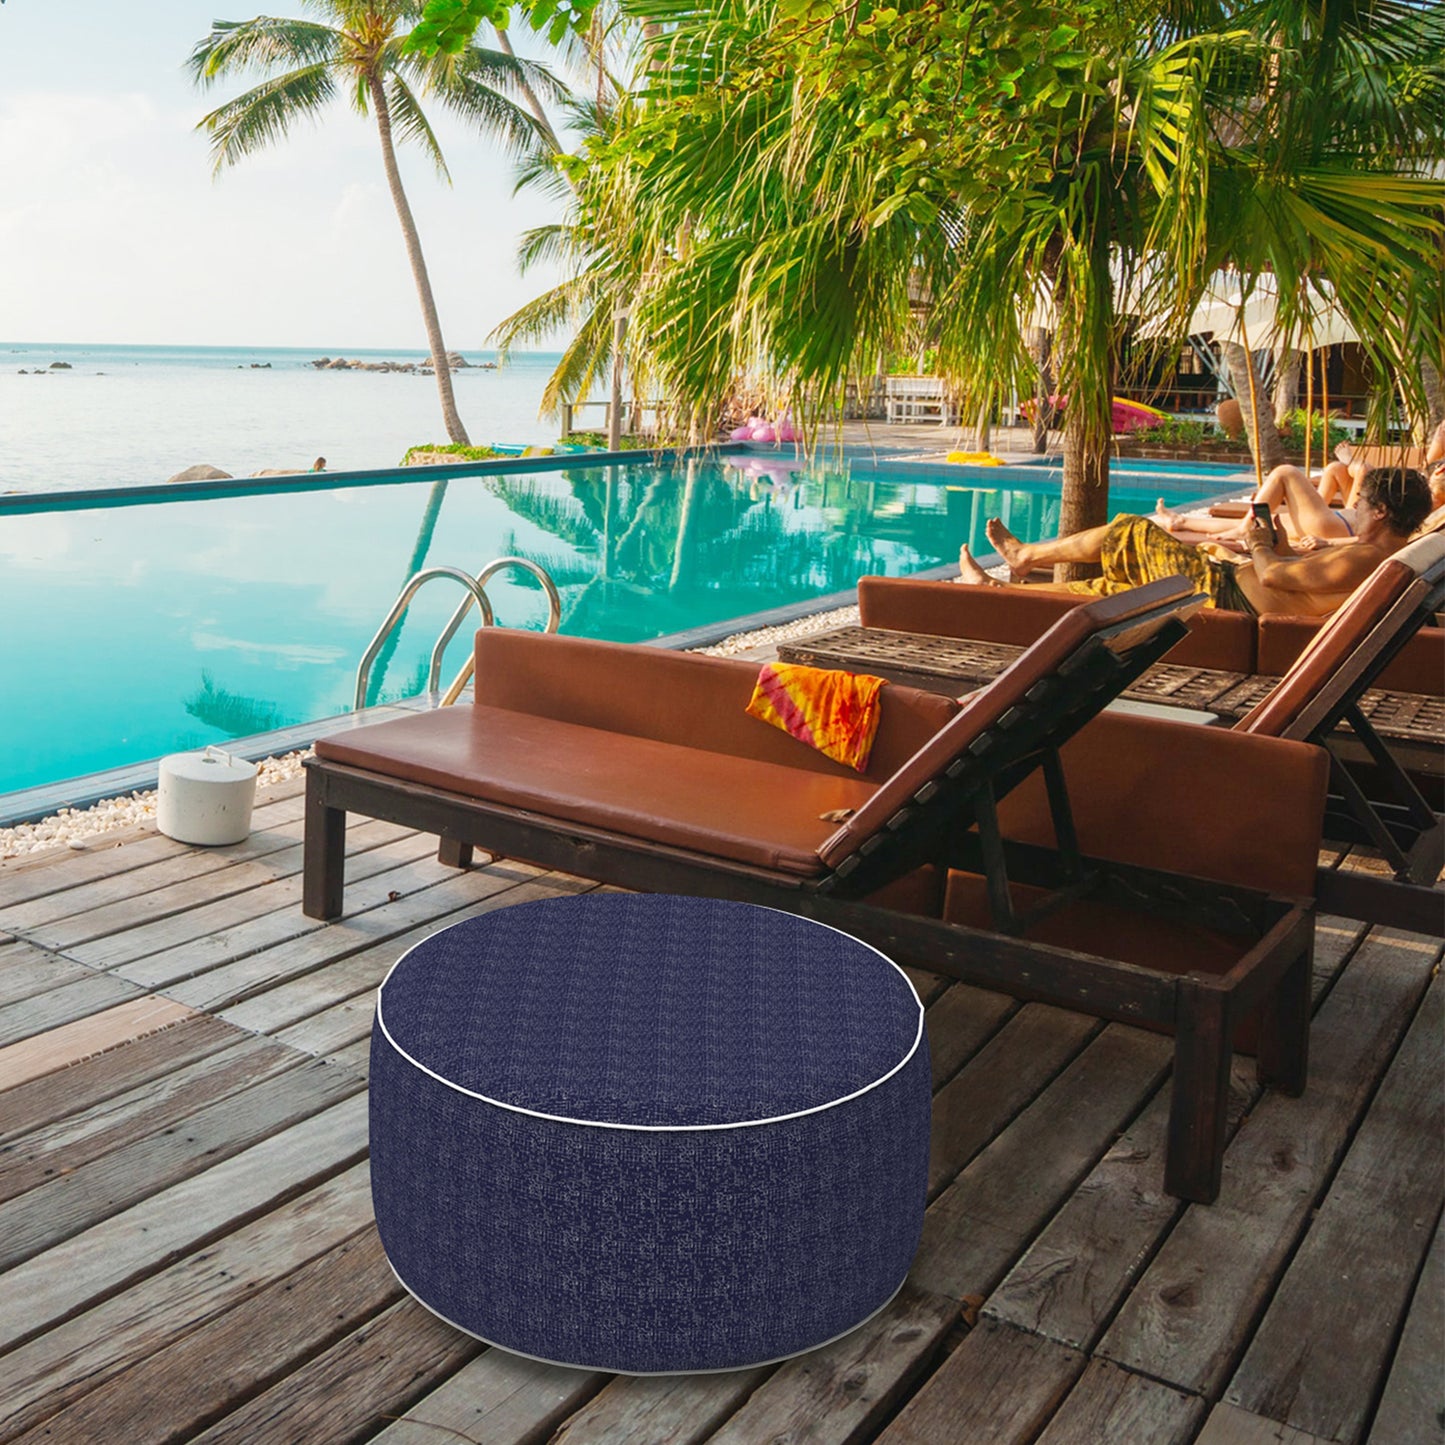 Outdoor Inflatable Stool Ottoman, All Weather Portable Footrest Stool, Furniture Stool Ottomans for Home Garden Beach, D31”xH14”, Rave Indigo